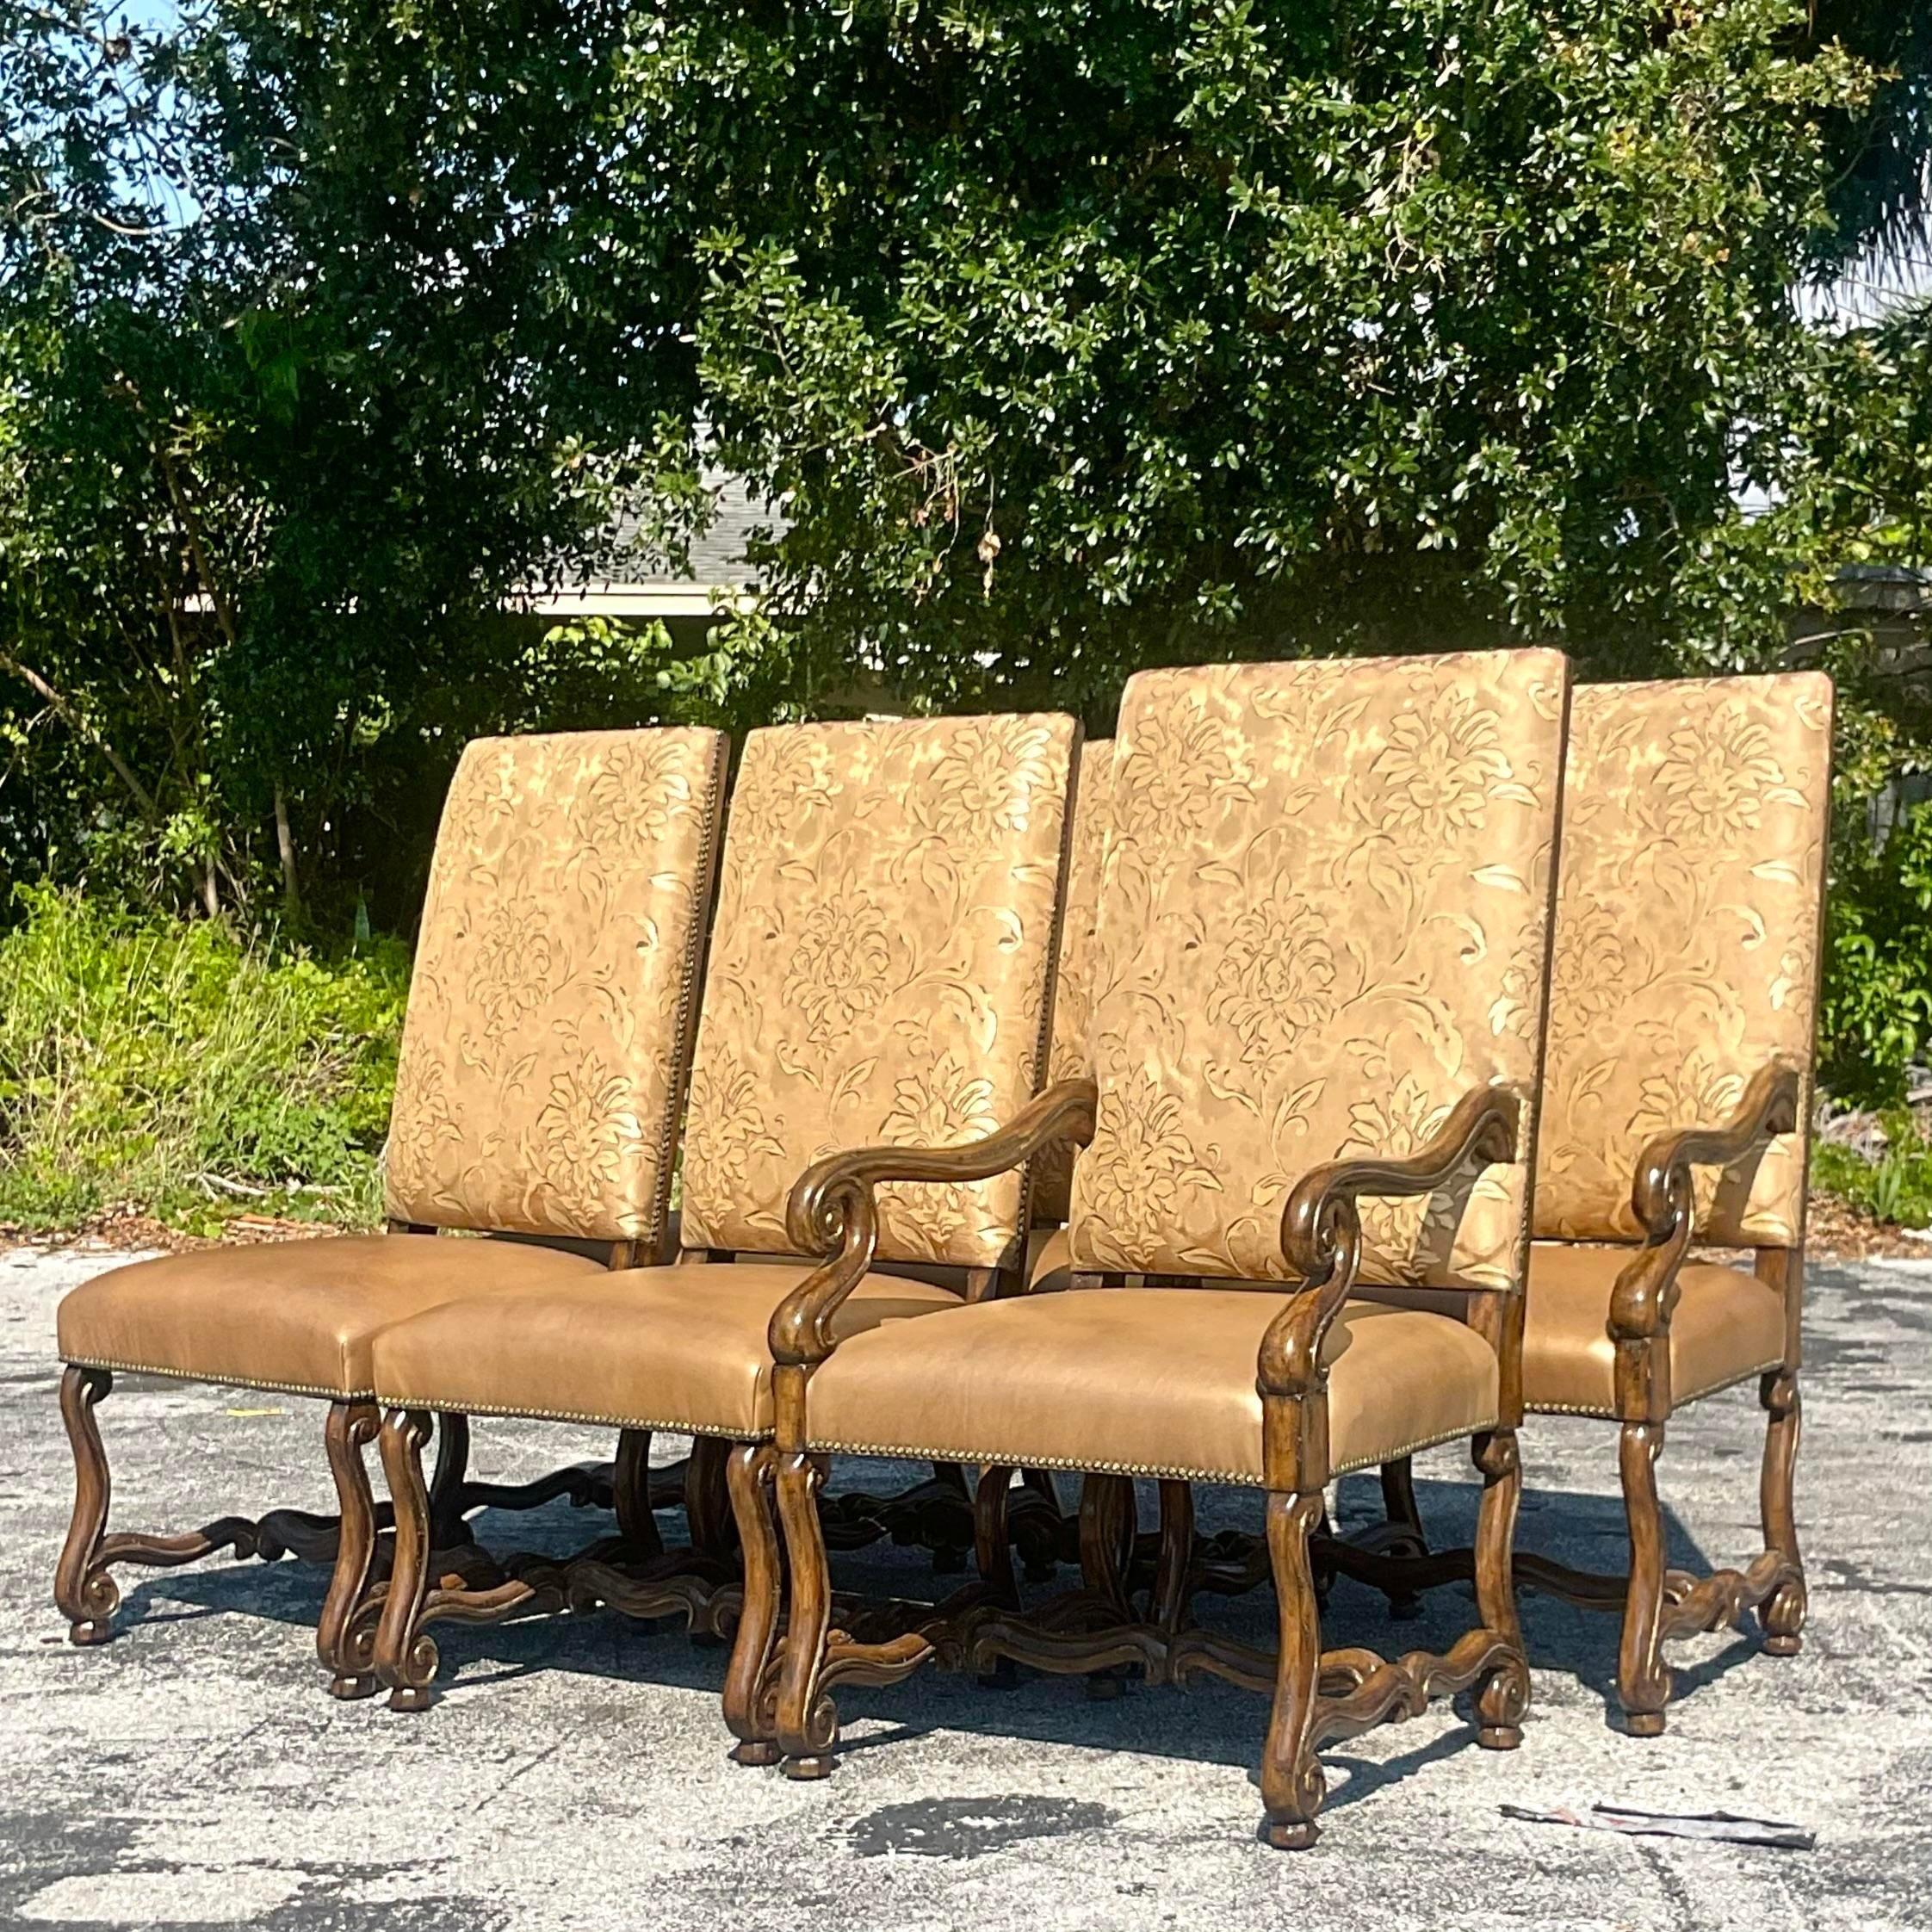 Vintage Boho Marge Carson’s High Back Leather and Brocade Dining Chairs, Set of 6